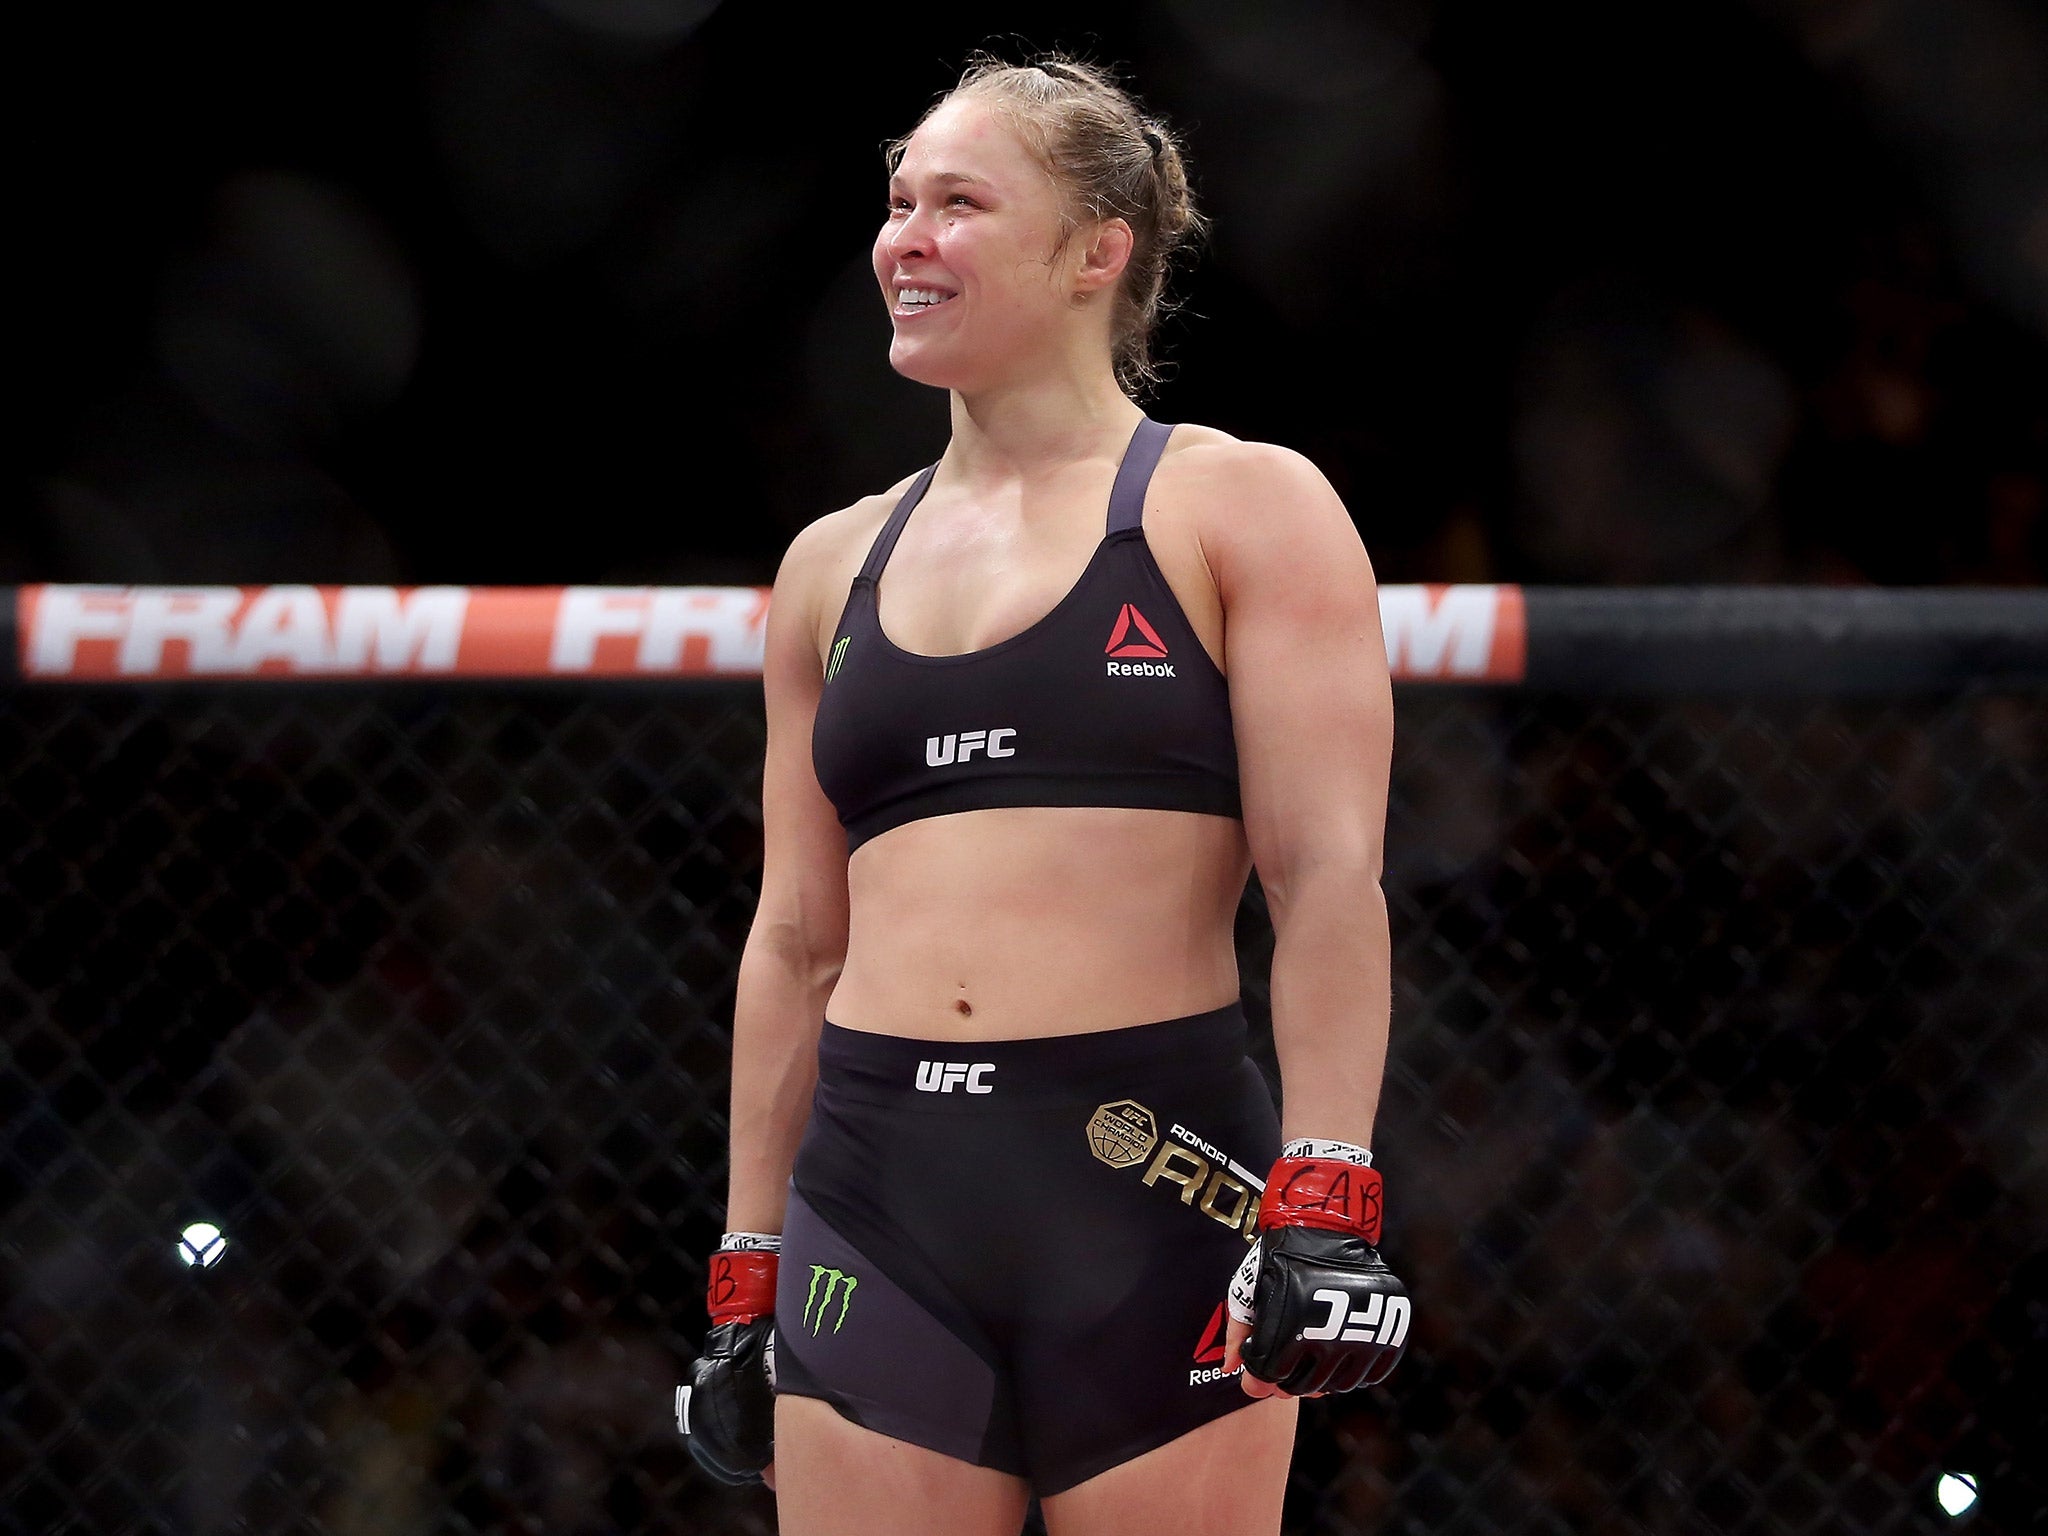 Ronda Rousey has won fans for her stance against sexism